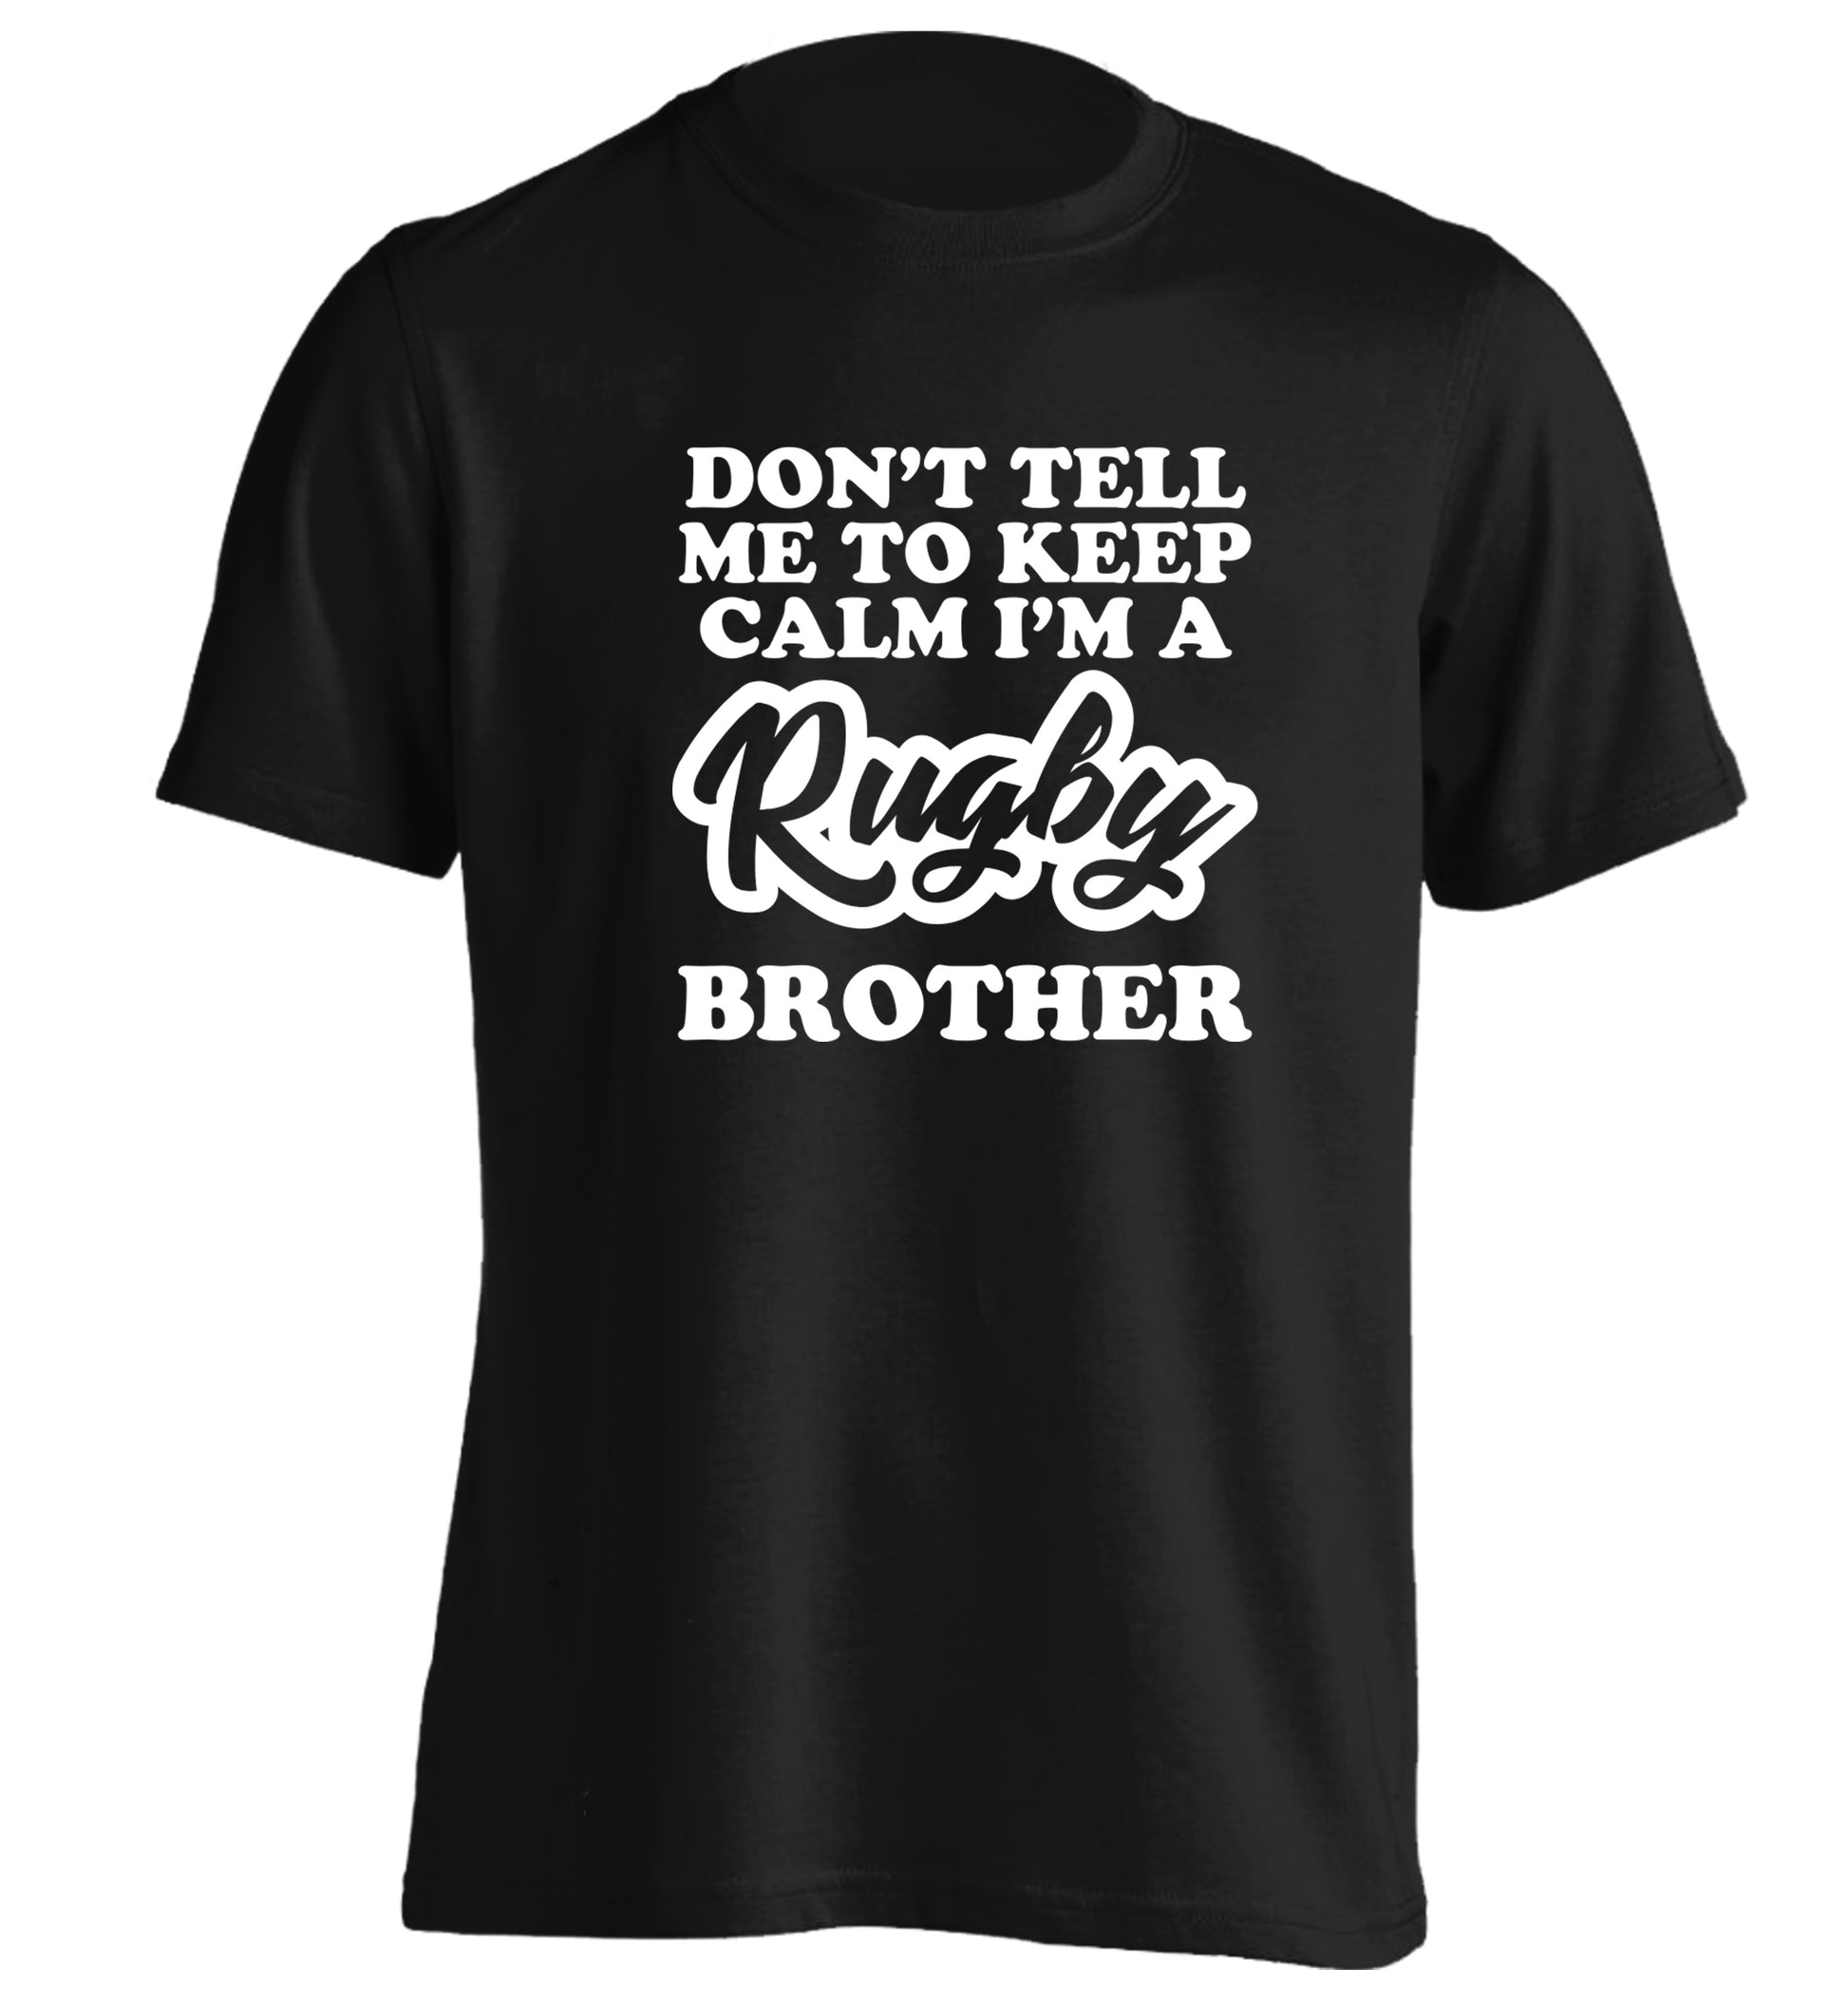 Don't tell me keep calm I'm a rugby brother adults unisex black Tshirt 2XL